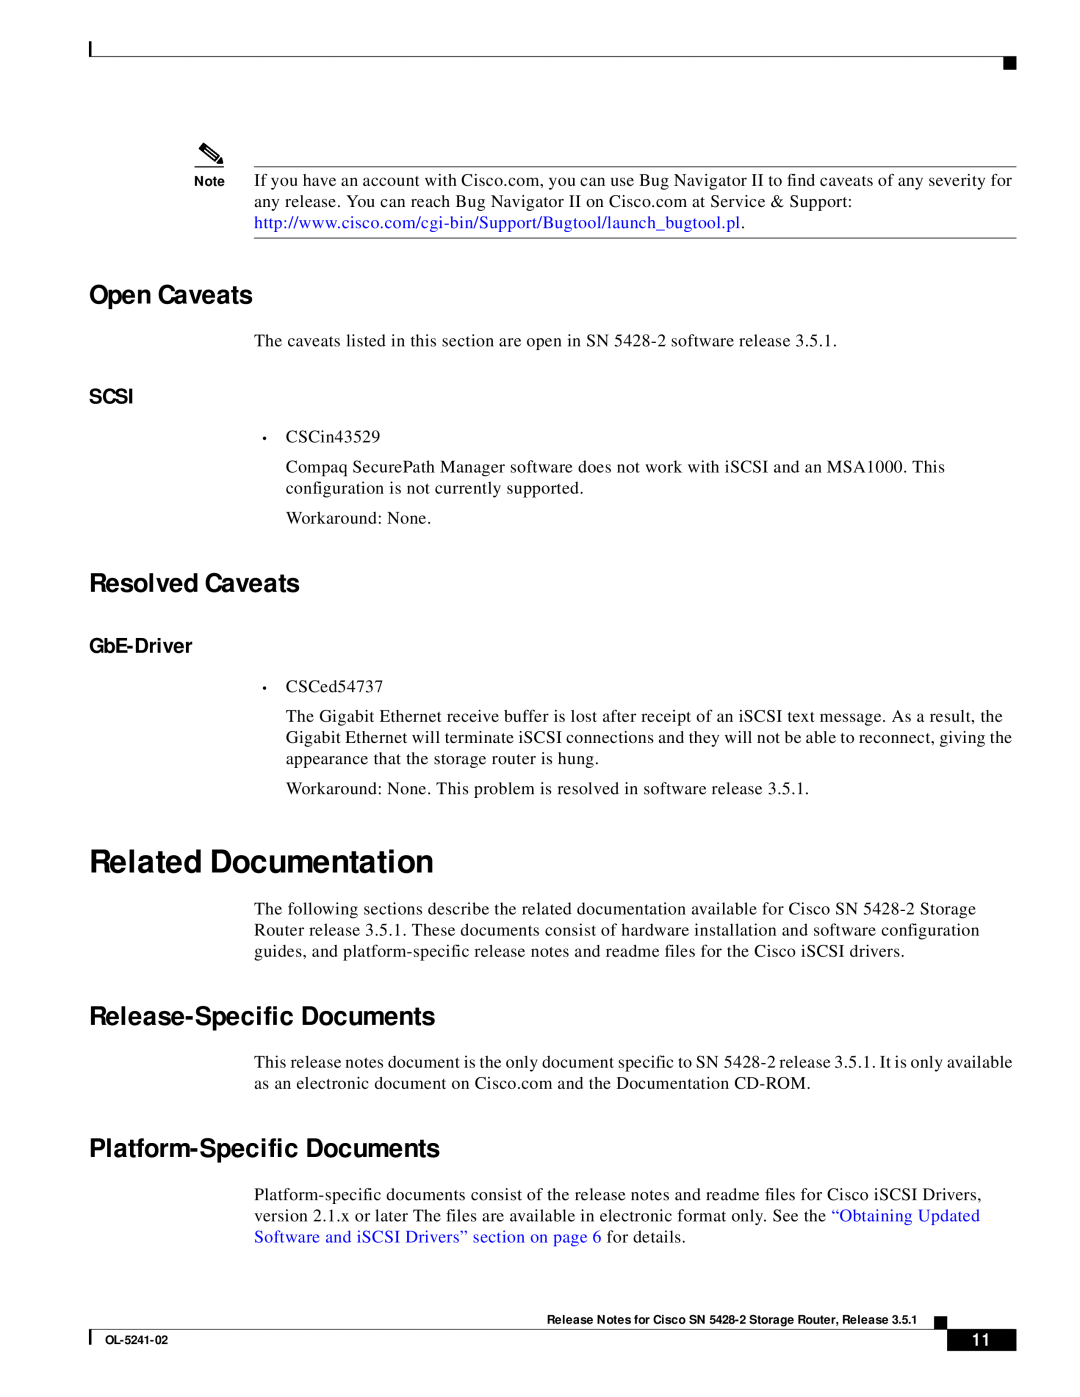 Cisco Systems SN 5428-2 manual Related Documentation, Open Caveats, Resolved Caveats, Release-Specific Documents, Scsi 